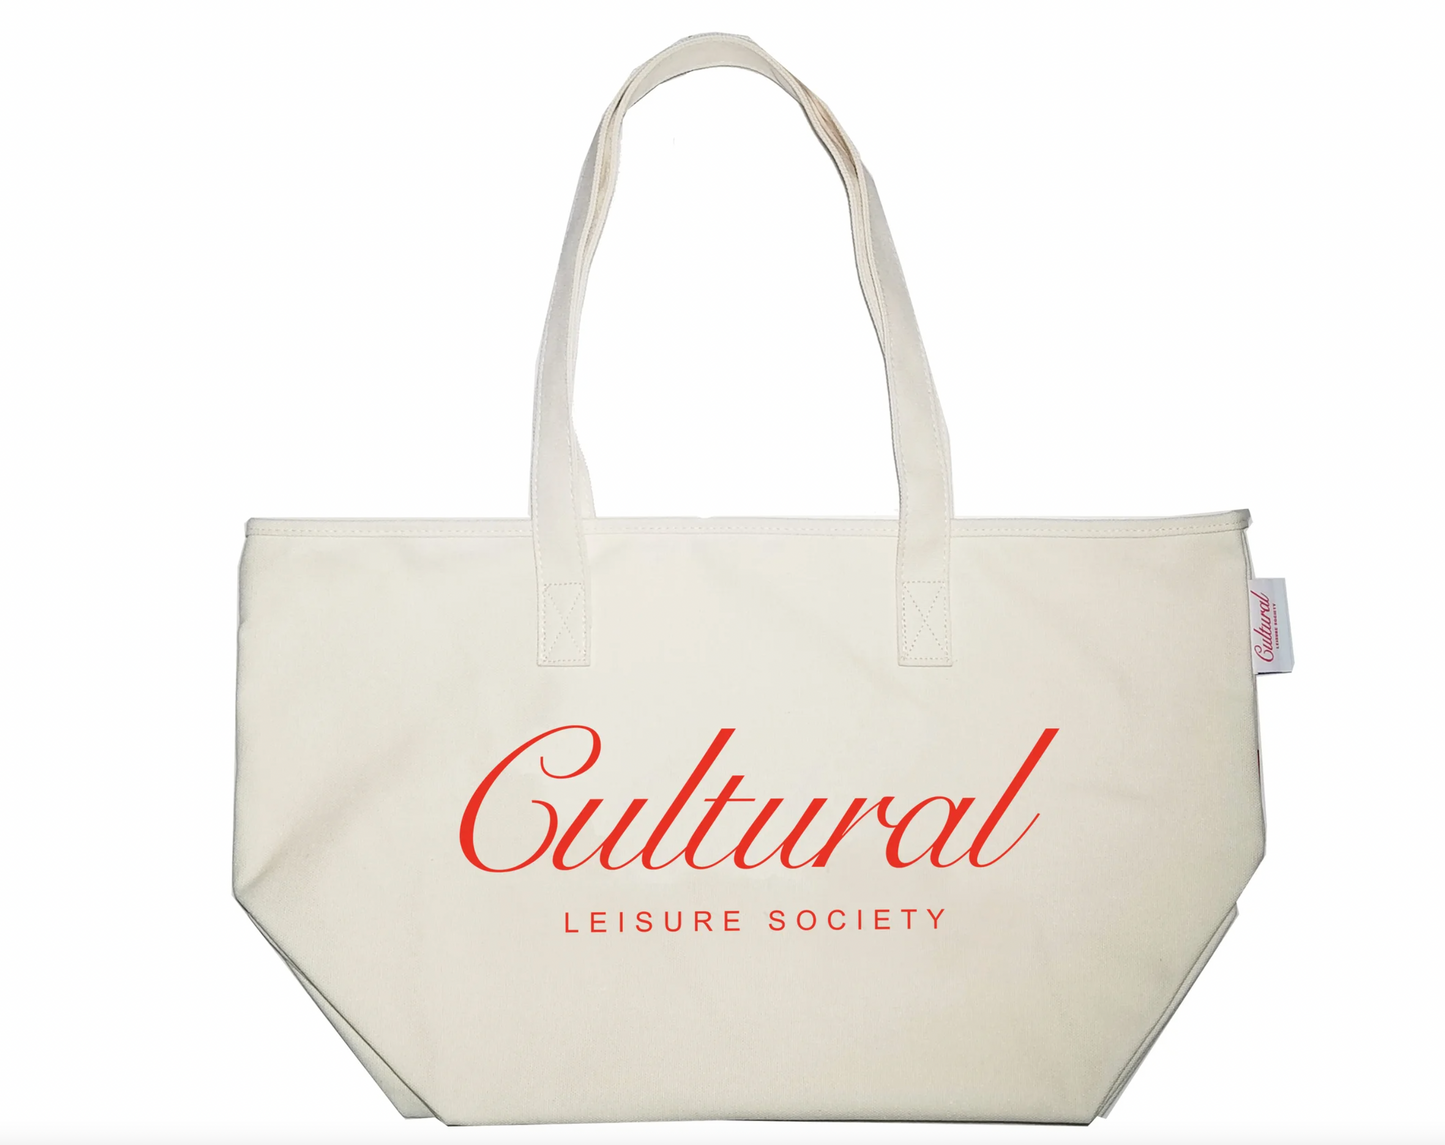 Matter Matters Cultural Leisure Society Tote Bag